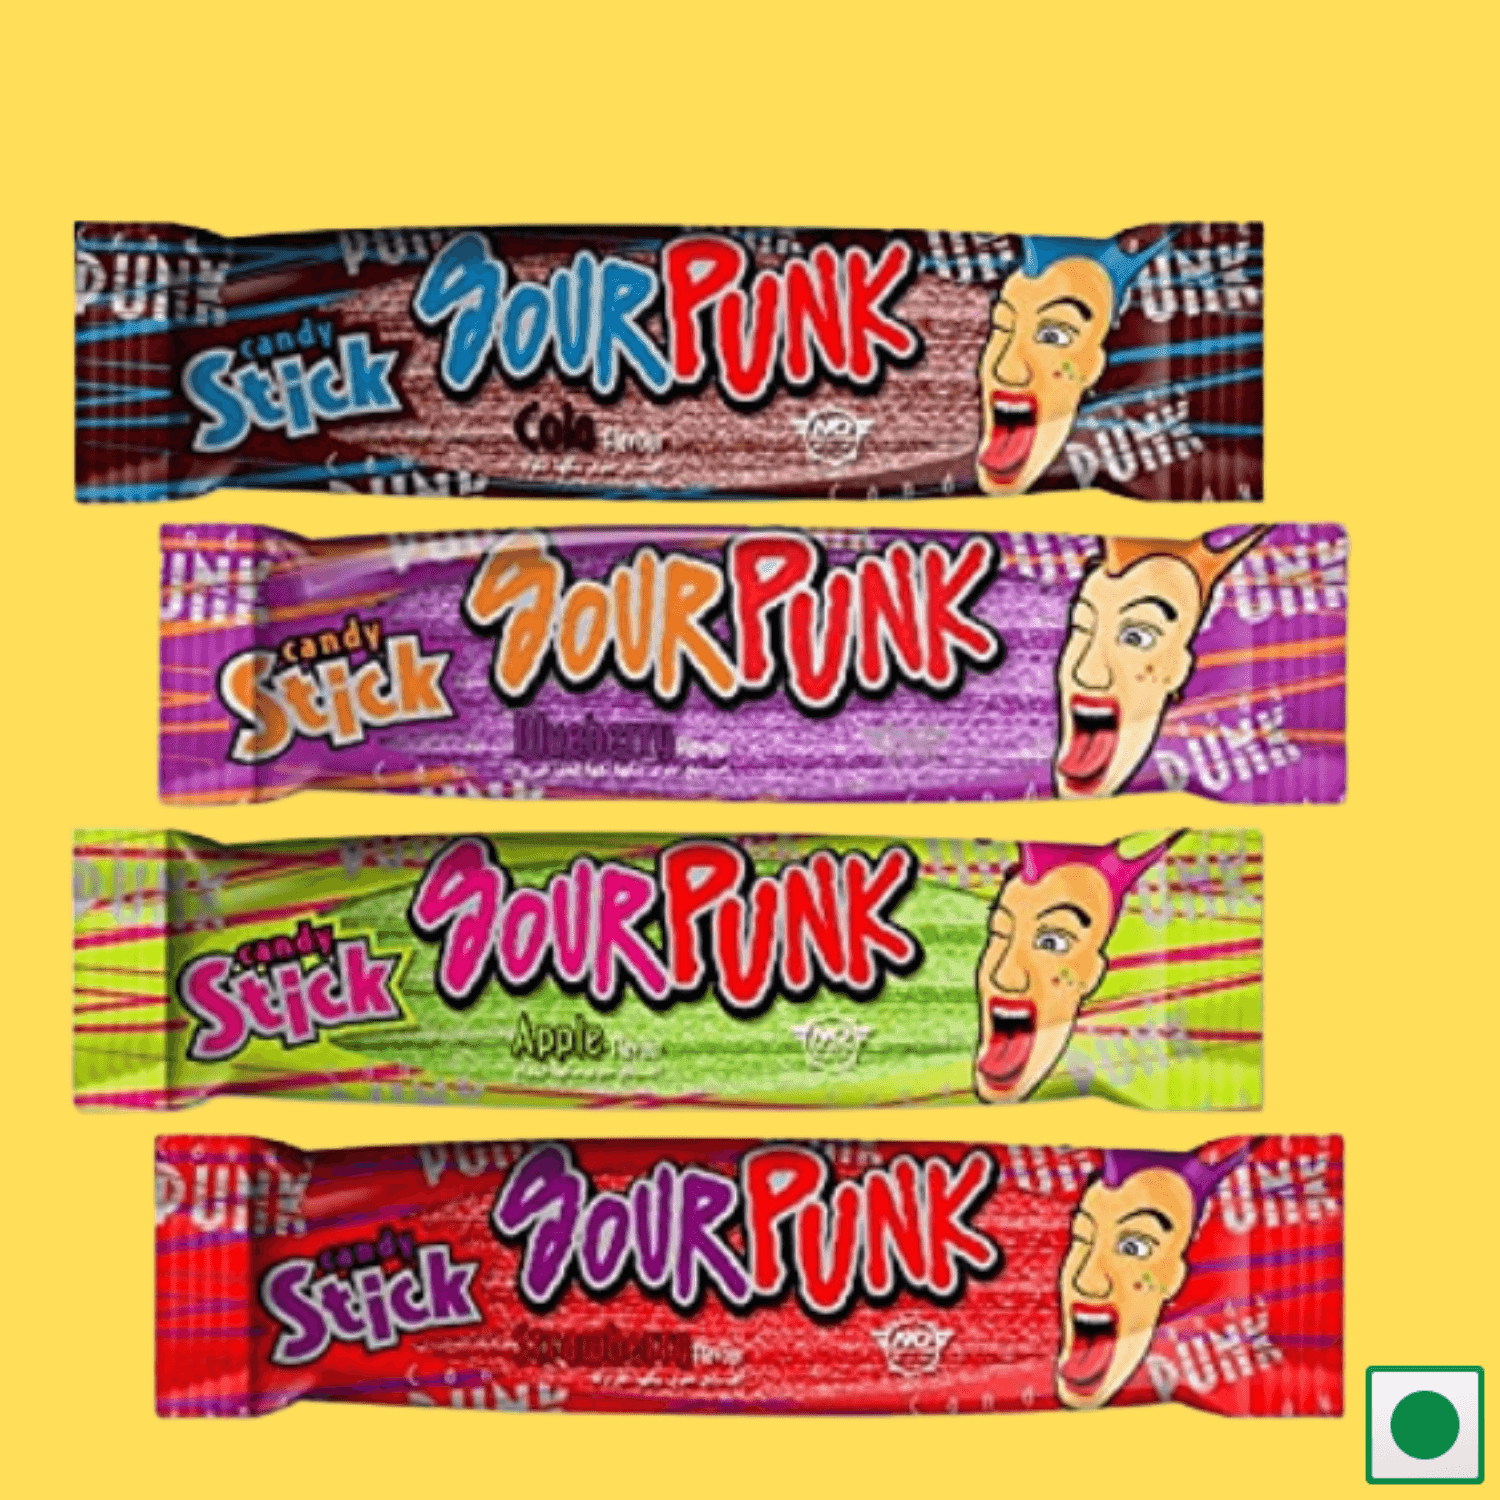 Sour Punk Mix Chewy Candy Jelly Sticks 40g X 24Pcs (Strawberry, Apple, blueberry & Cola) (Imported) - Super 7 Mart